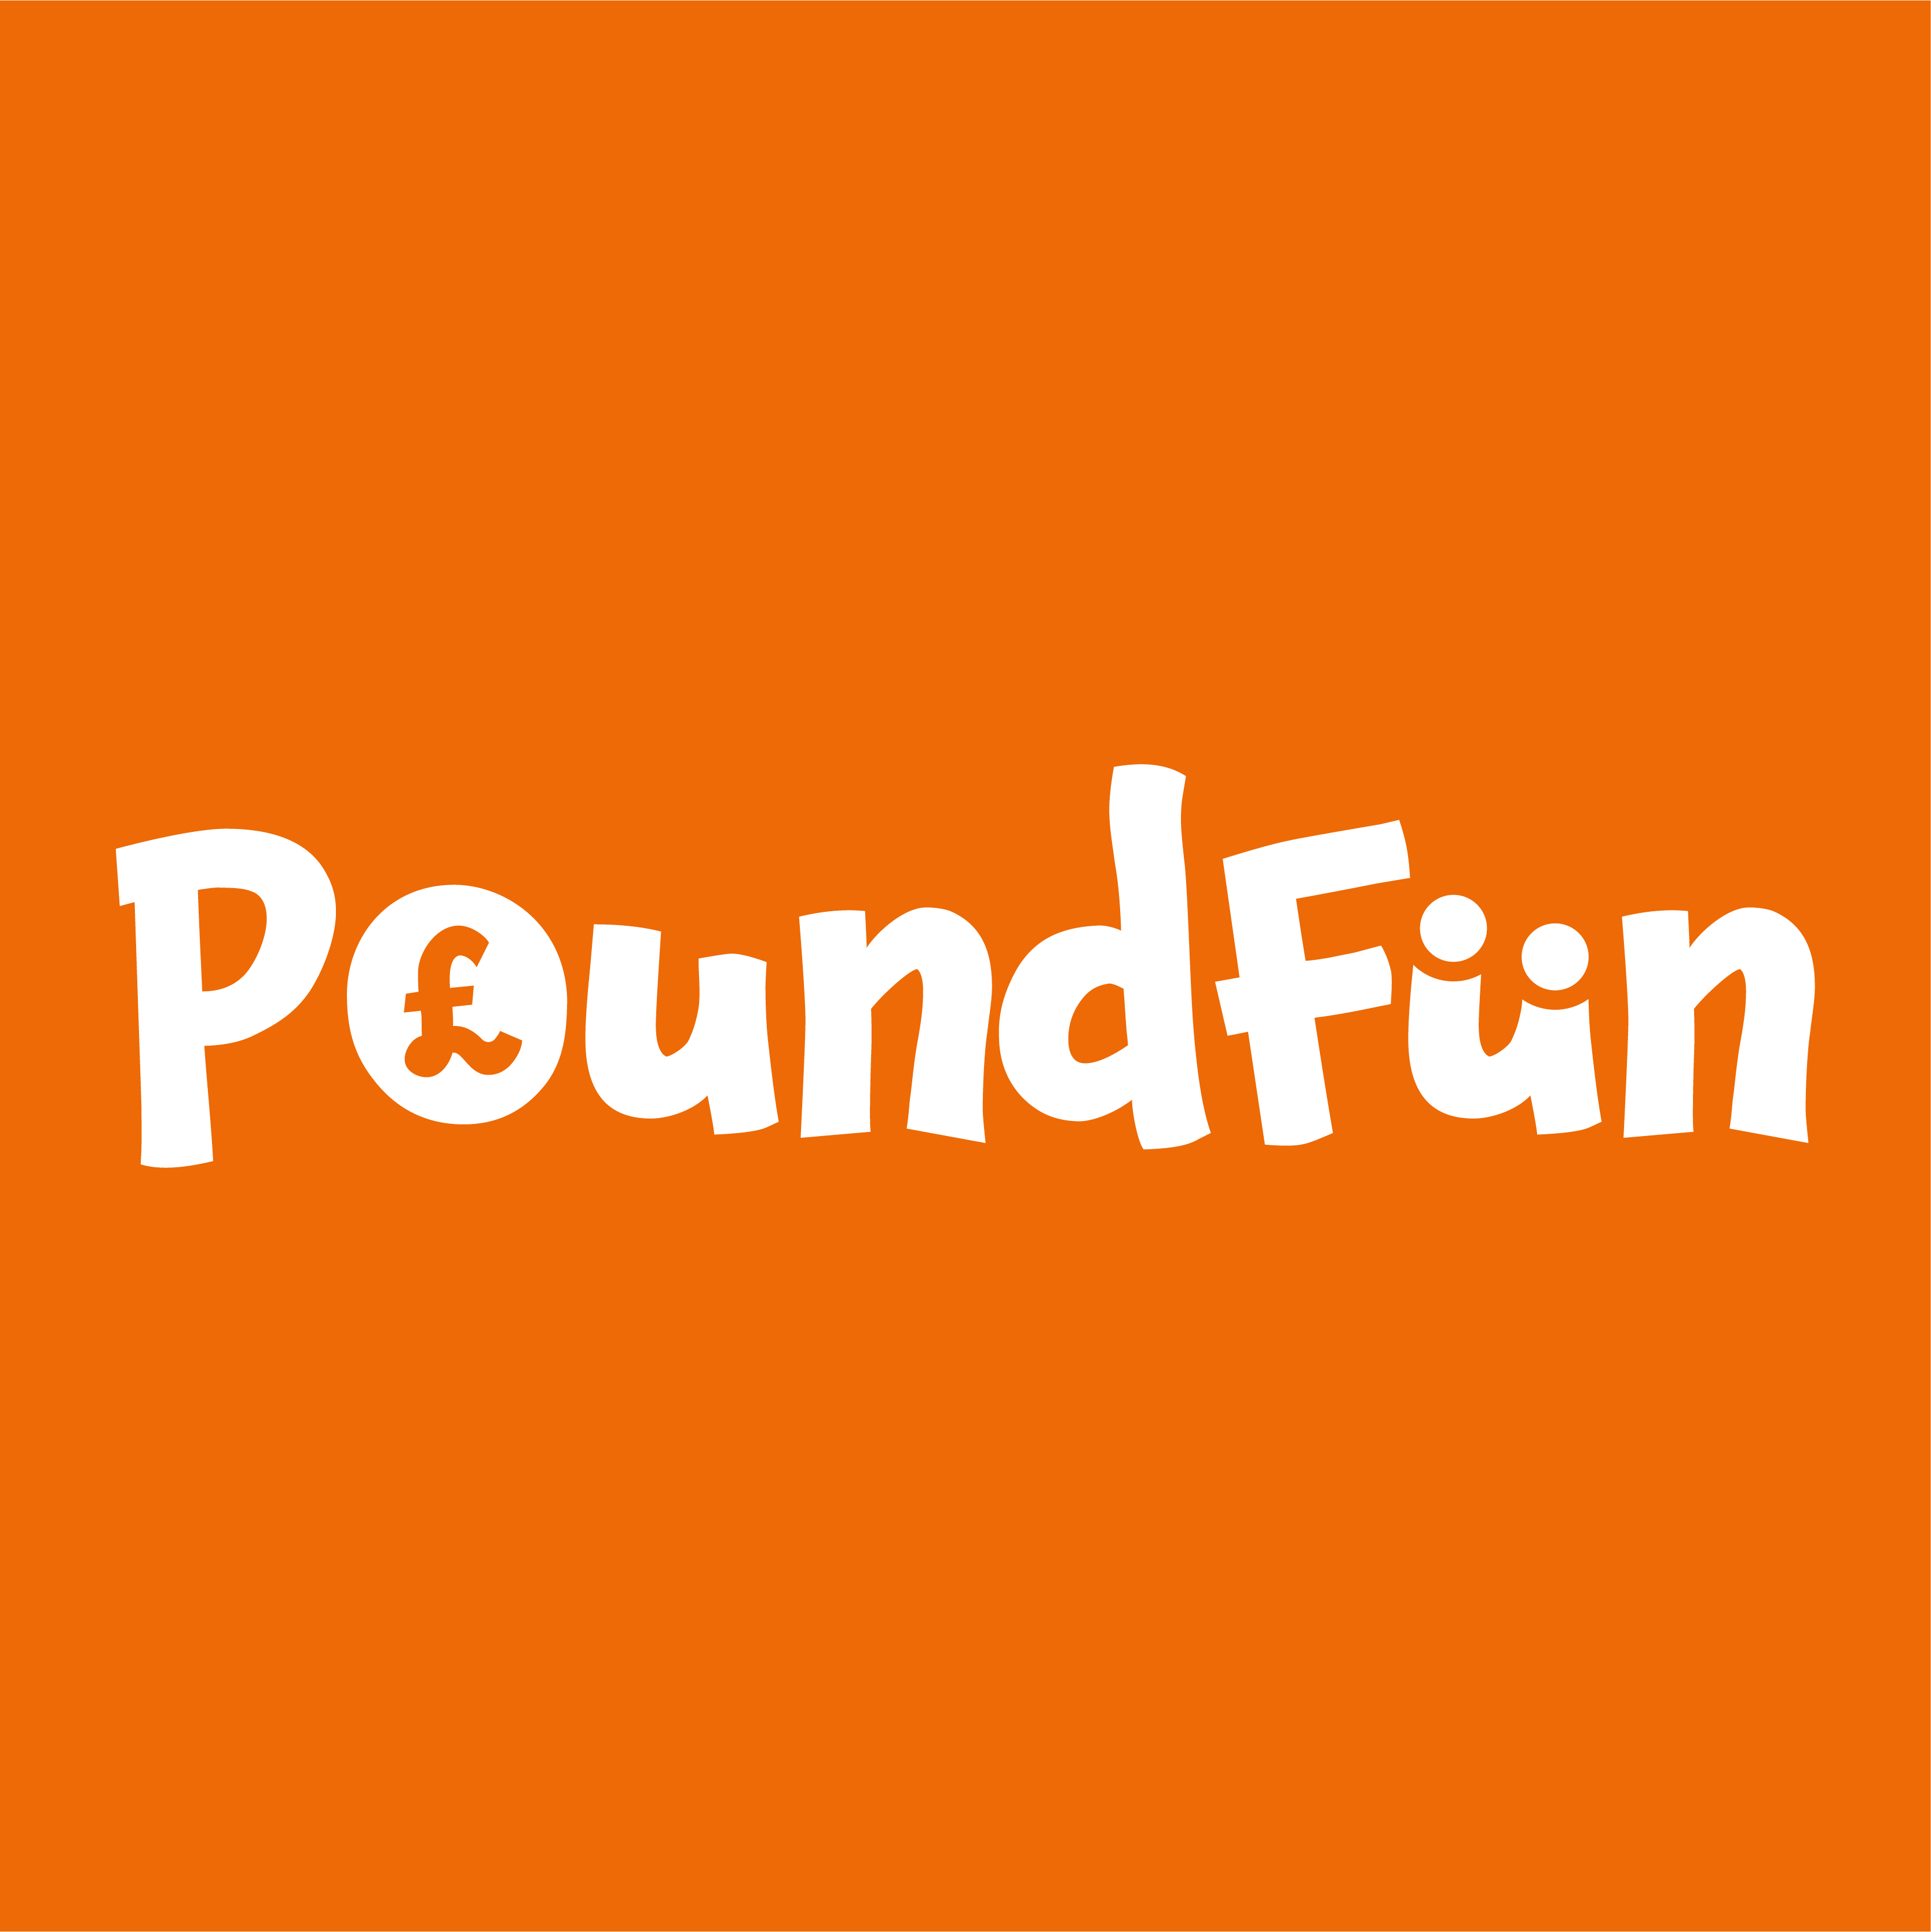 Crystal Growing Kit Purple  Free Delivery – PoundFun™